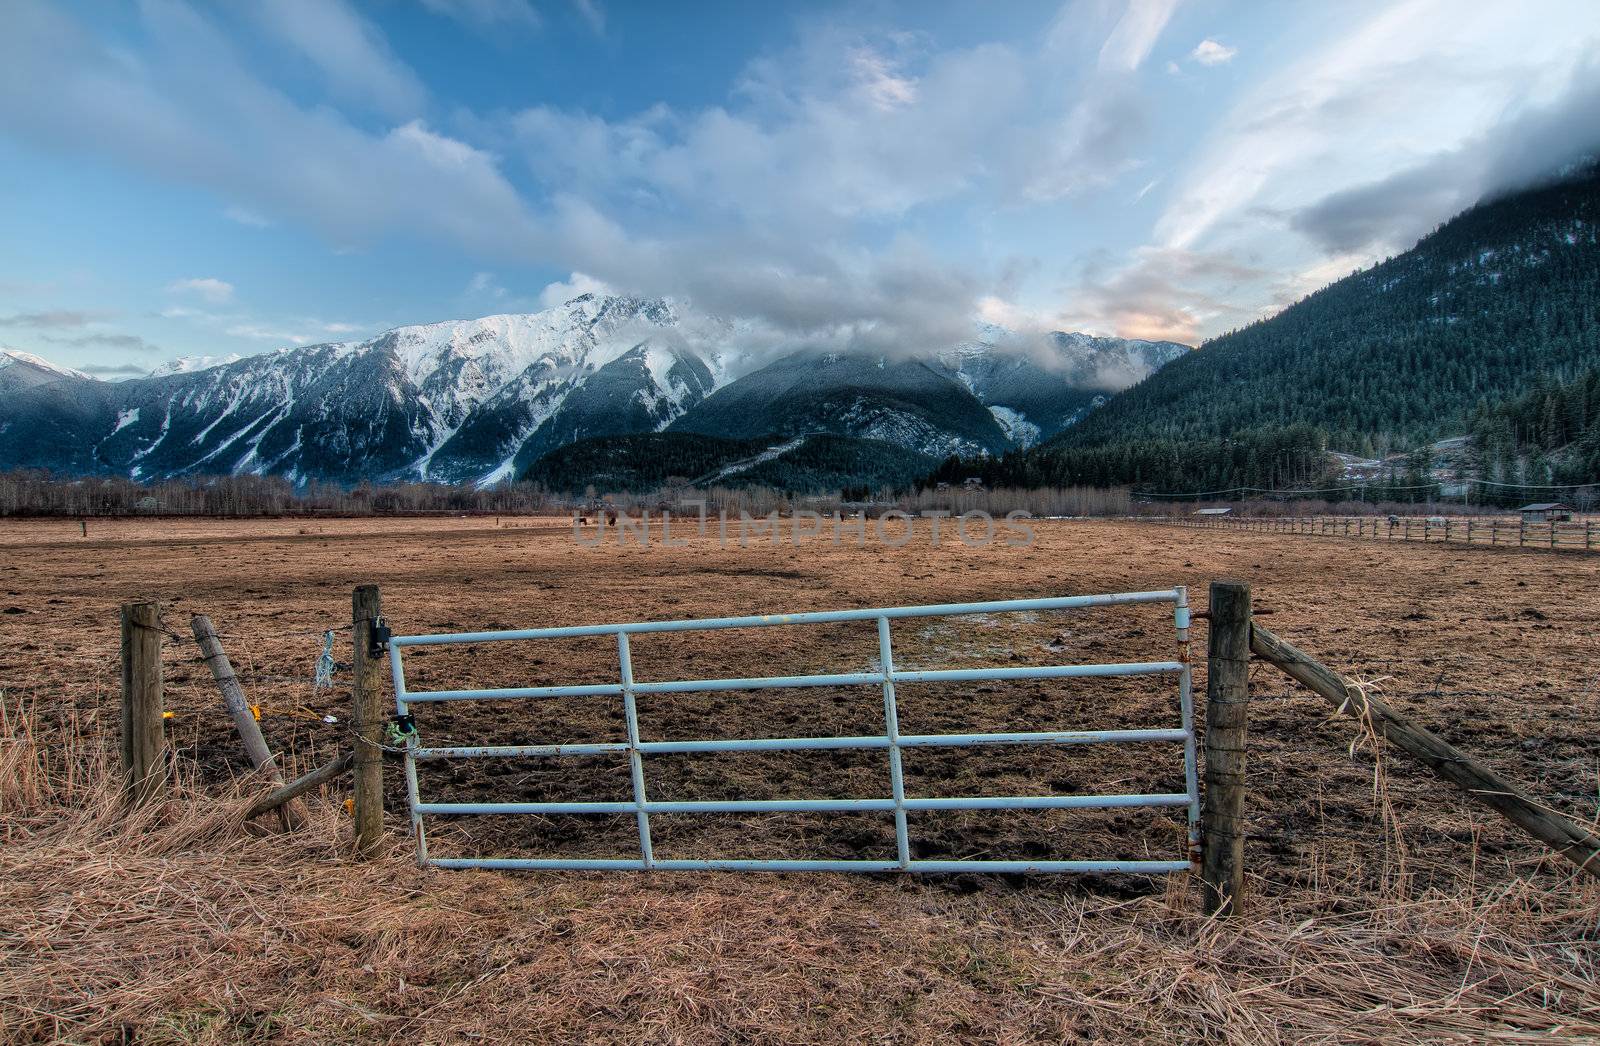 Fence Gate with Snowy Mountains by JamesWheeler